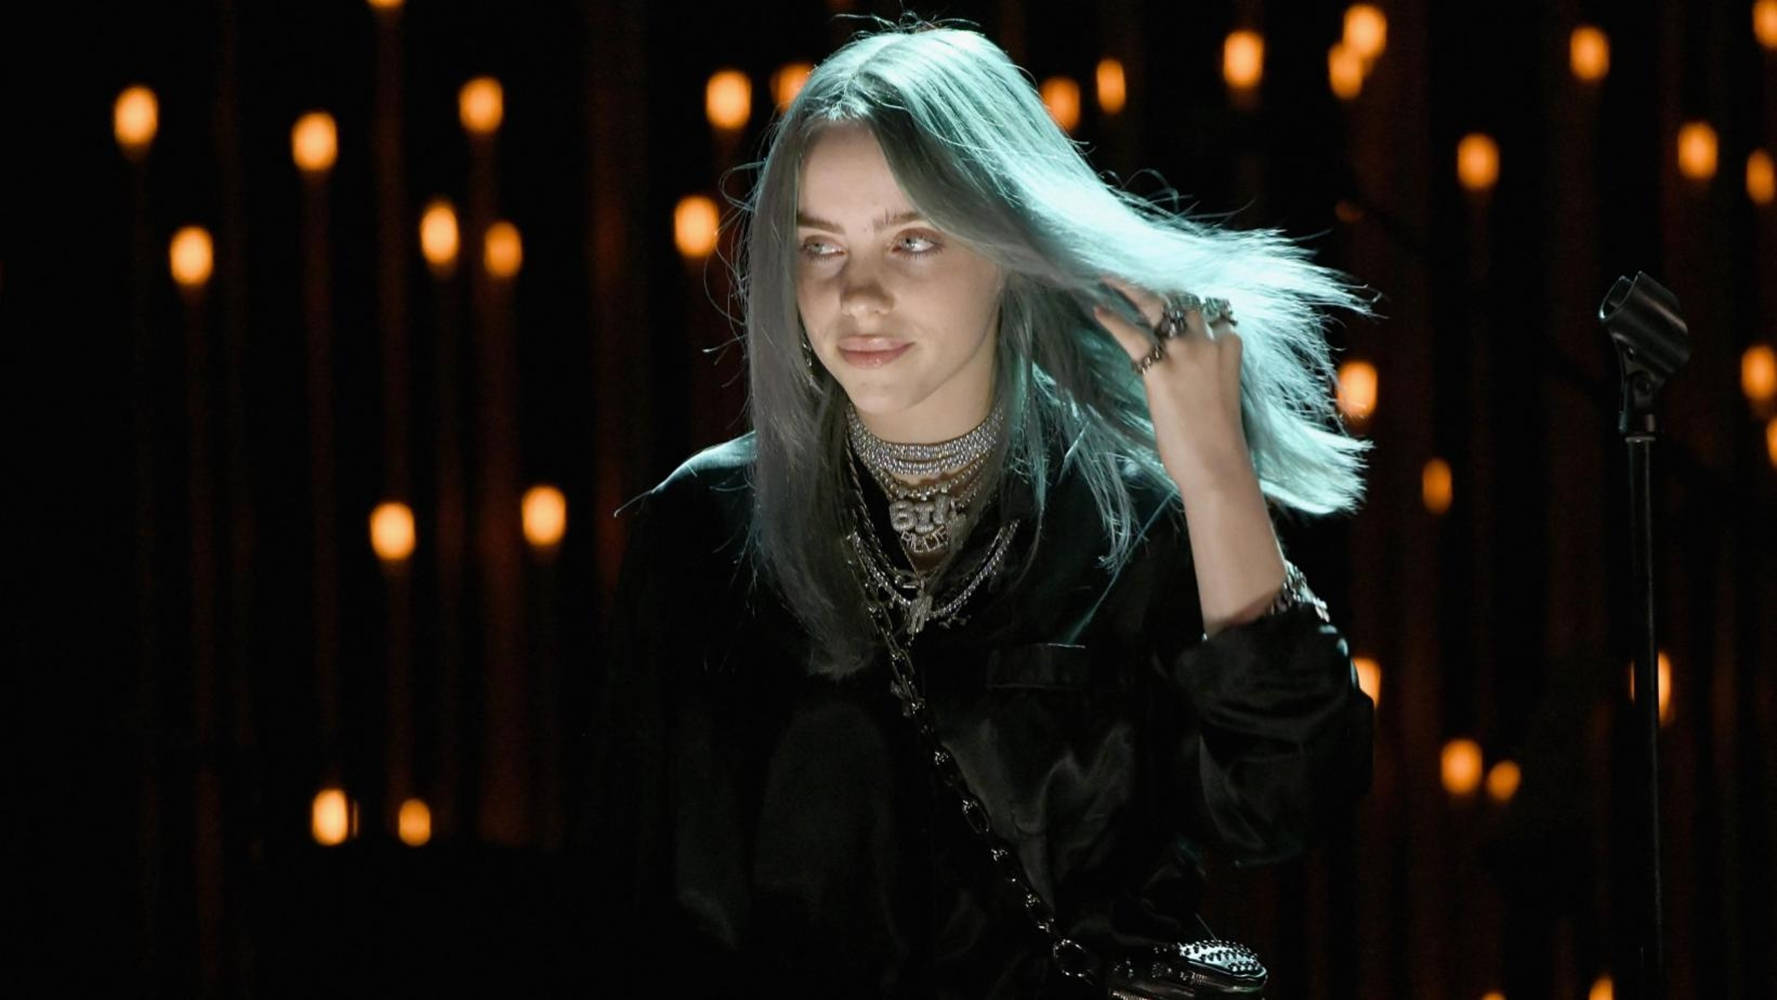 Aesthetic Billie Eilish With Lights Effect Background